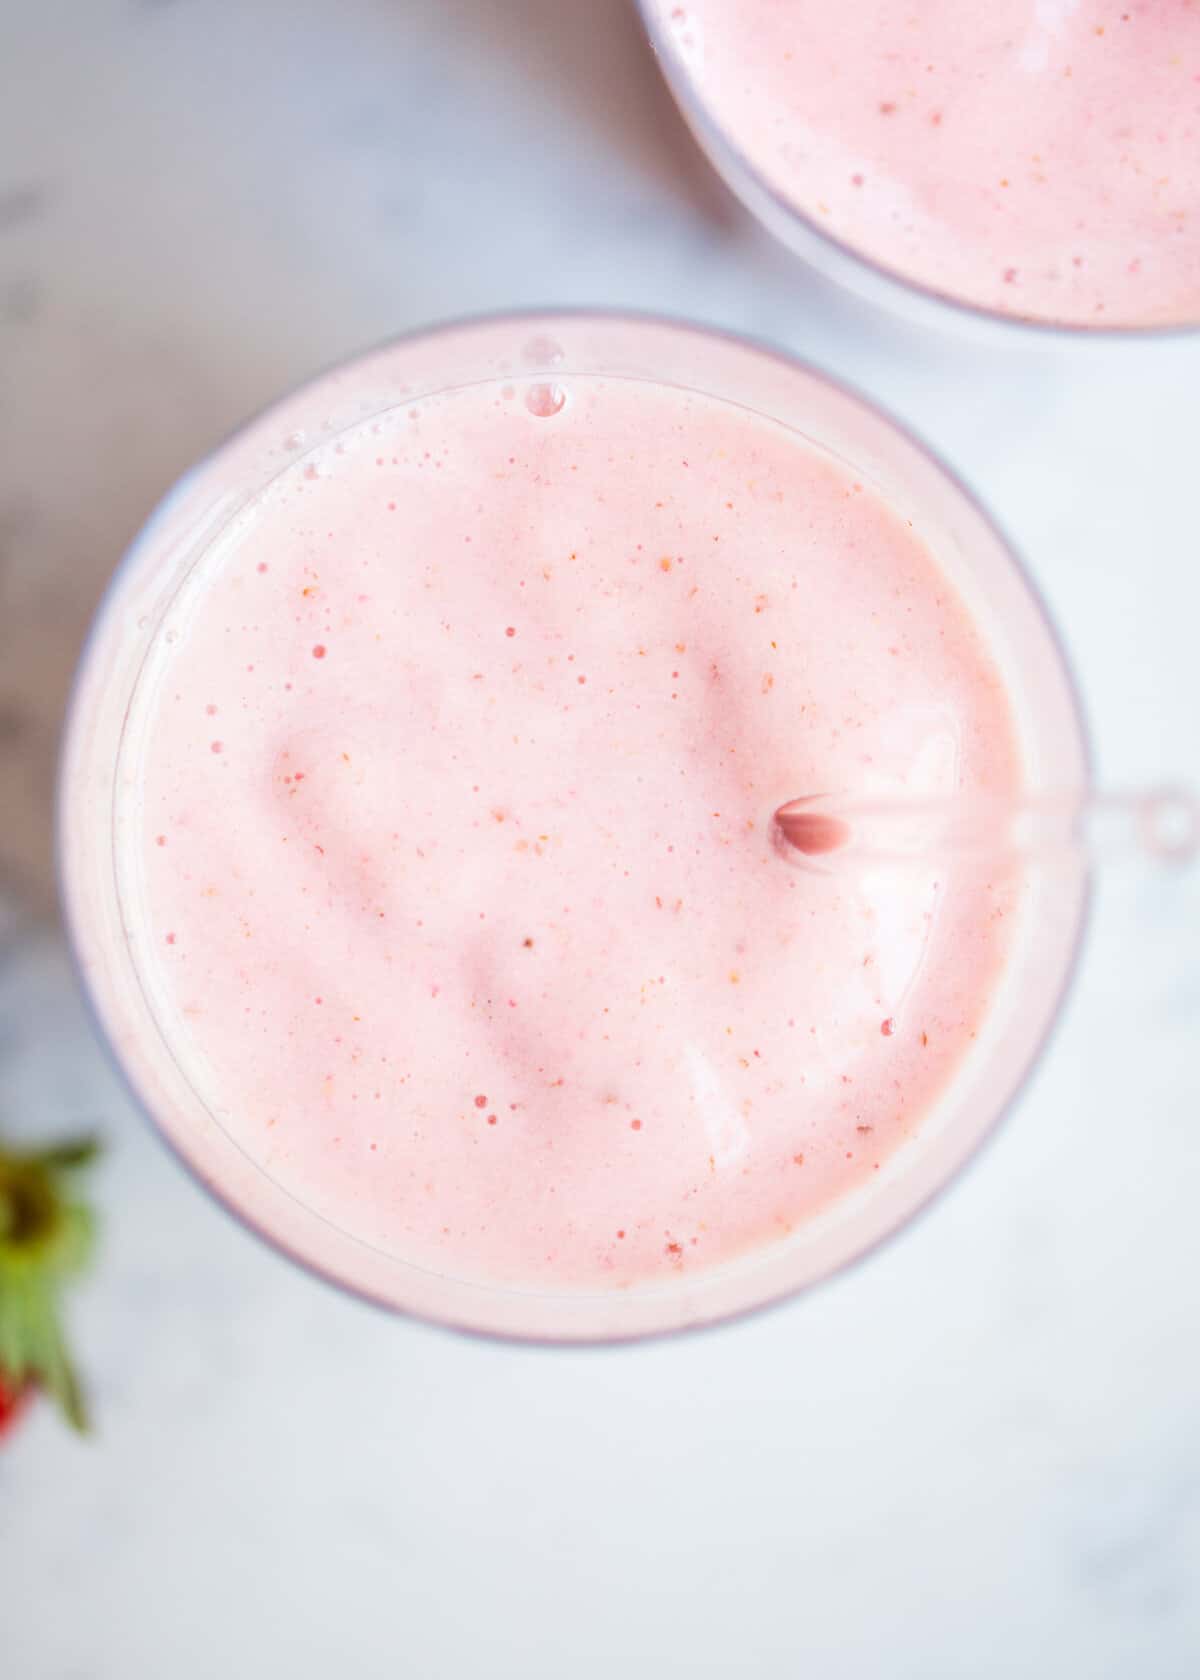 Strawberry banana smoothie in a glass cup with a straw.